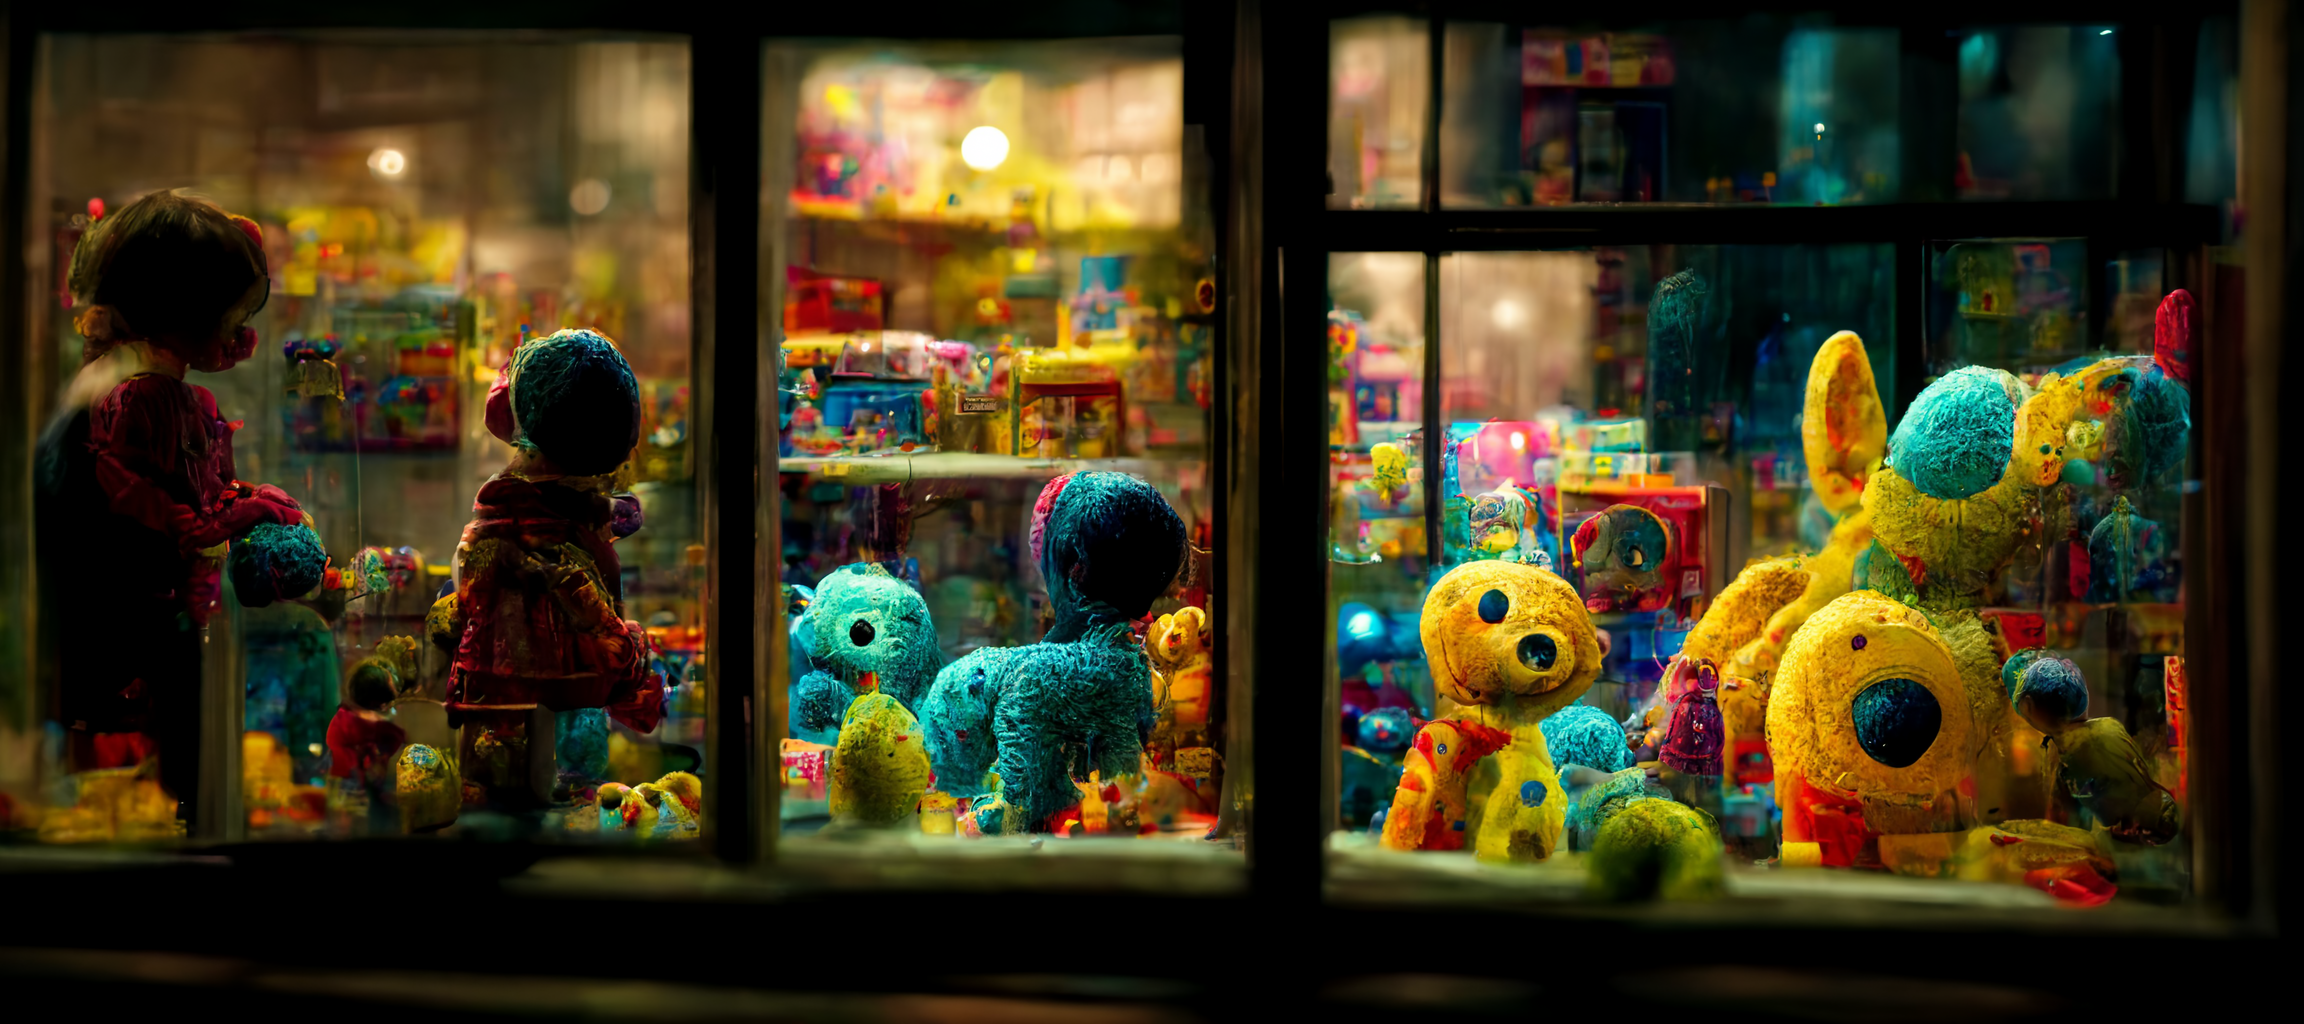 vibe_toys_looking_into_a_store_window_at_night._Children_inside_6ece32a5-6039-4611-89e0-101aa933184a